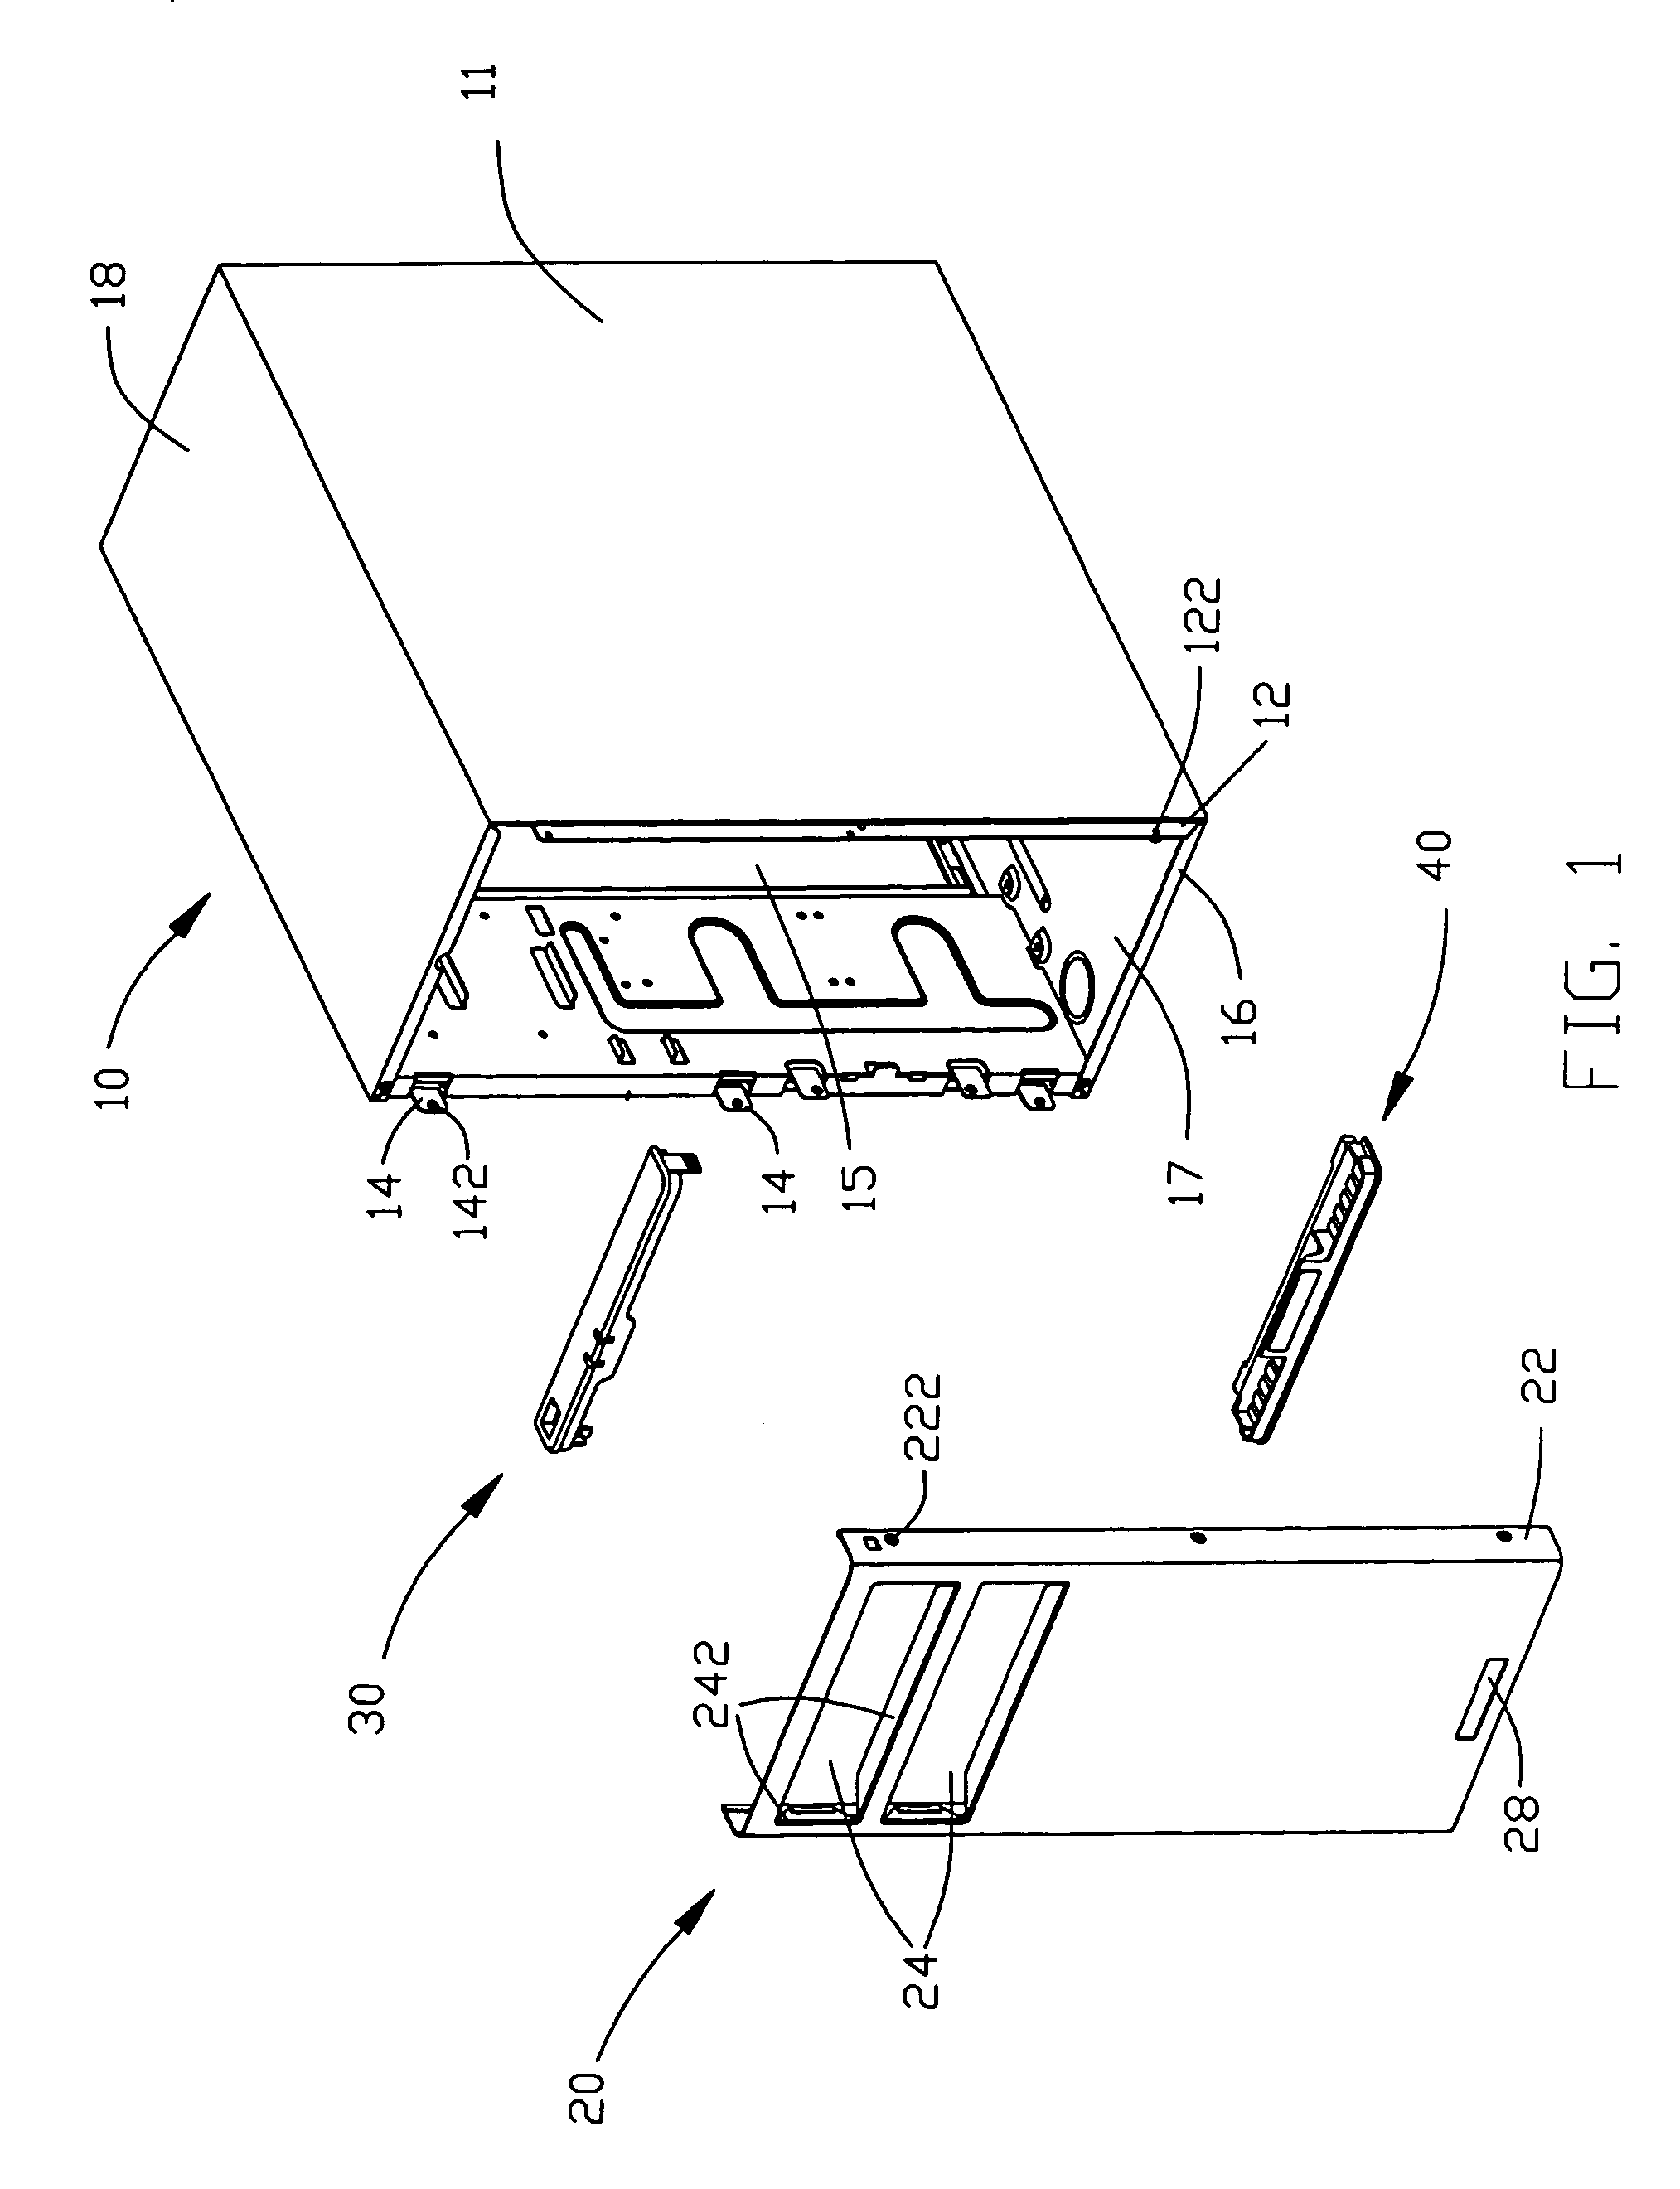 Computer enclosure with direct-mounting front bezel